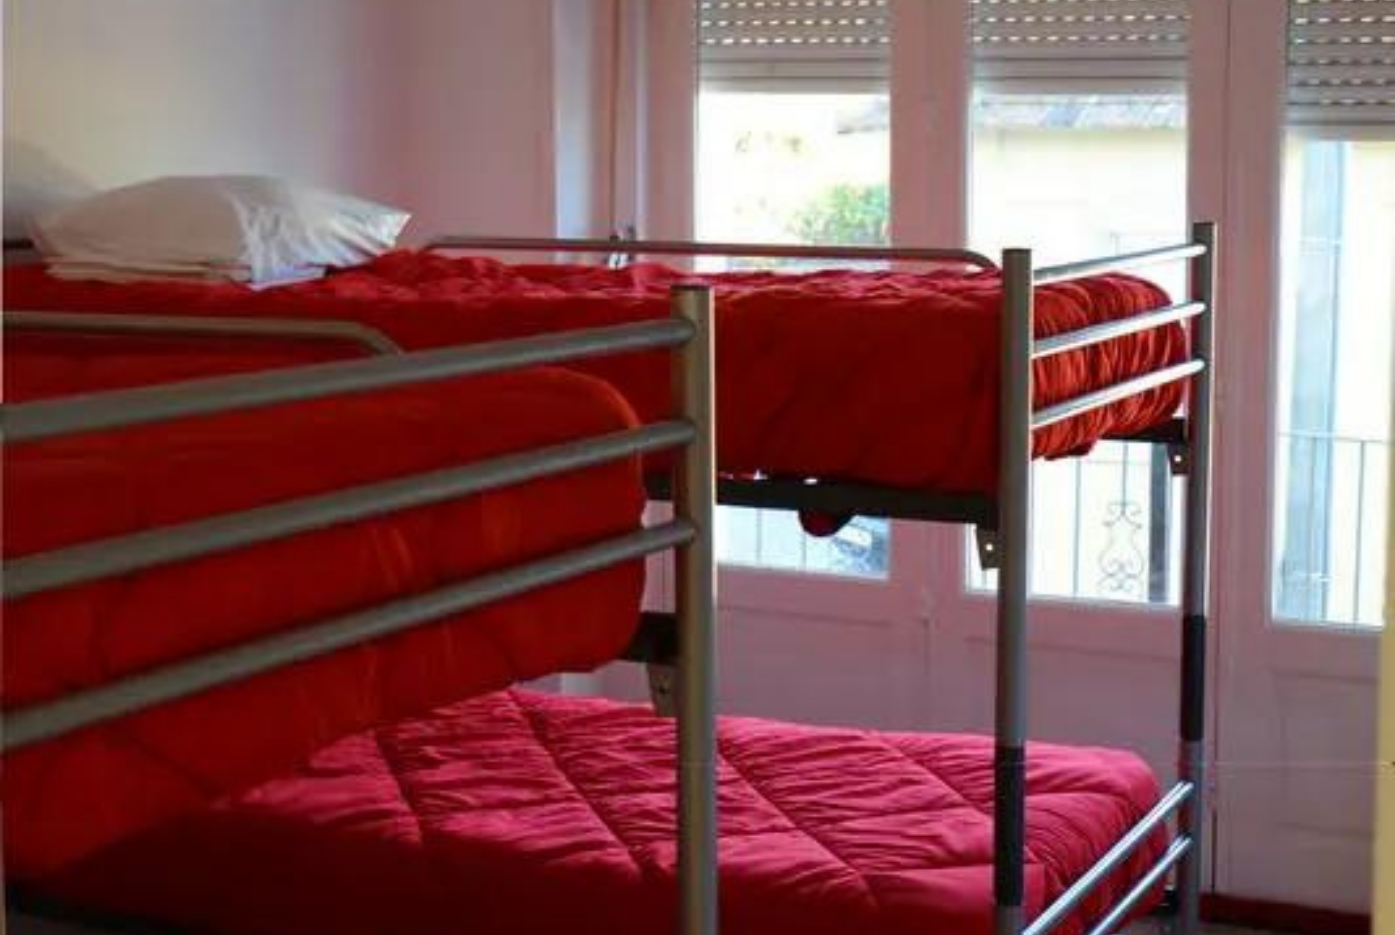 "Poets" 6-bed shared dorm in the AirPorto Hostel